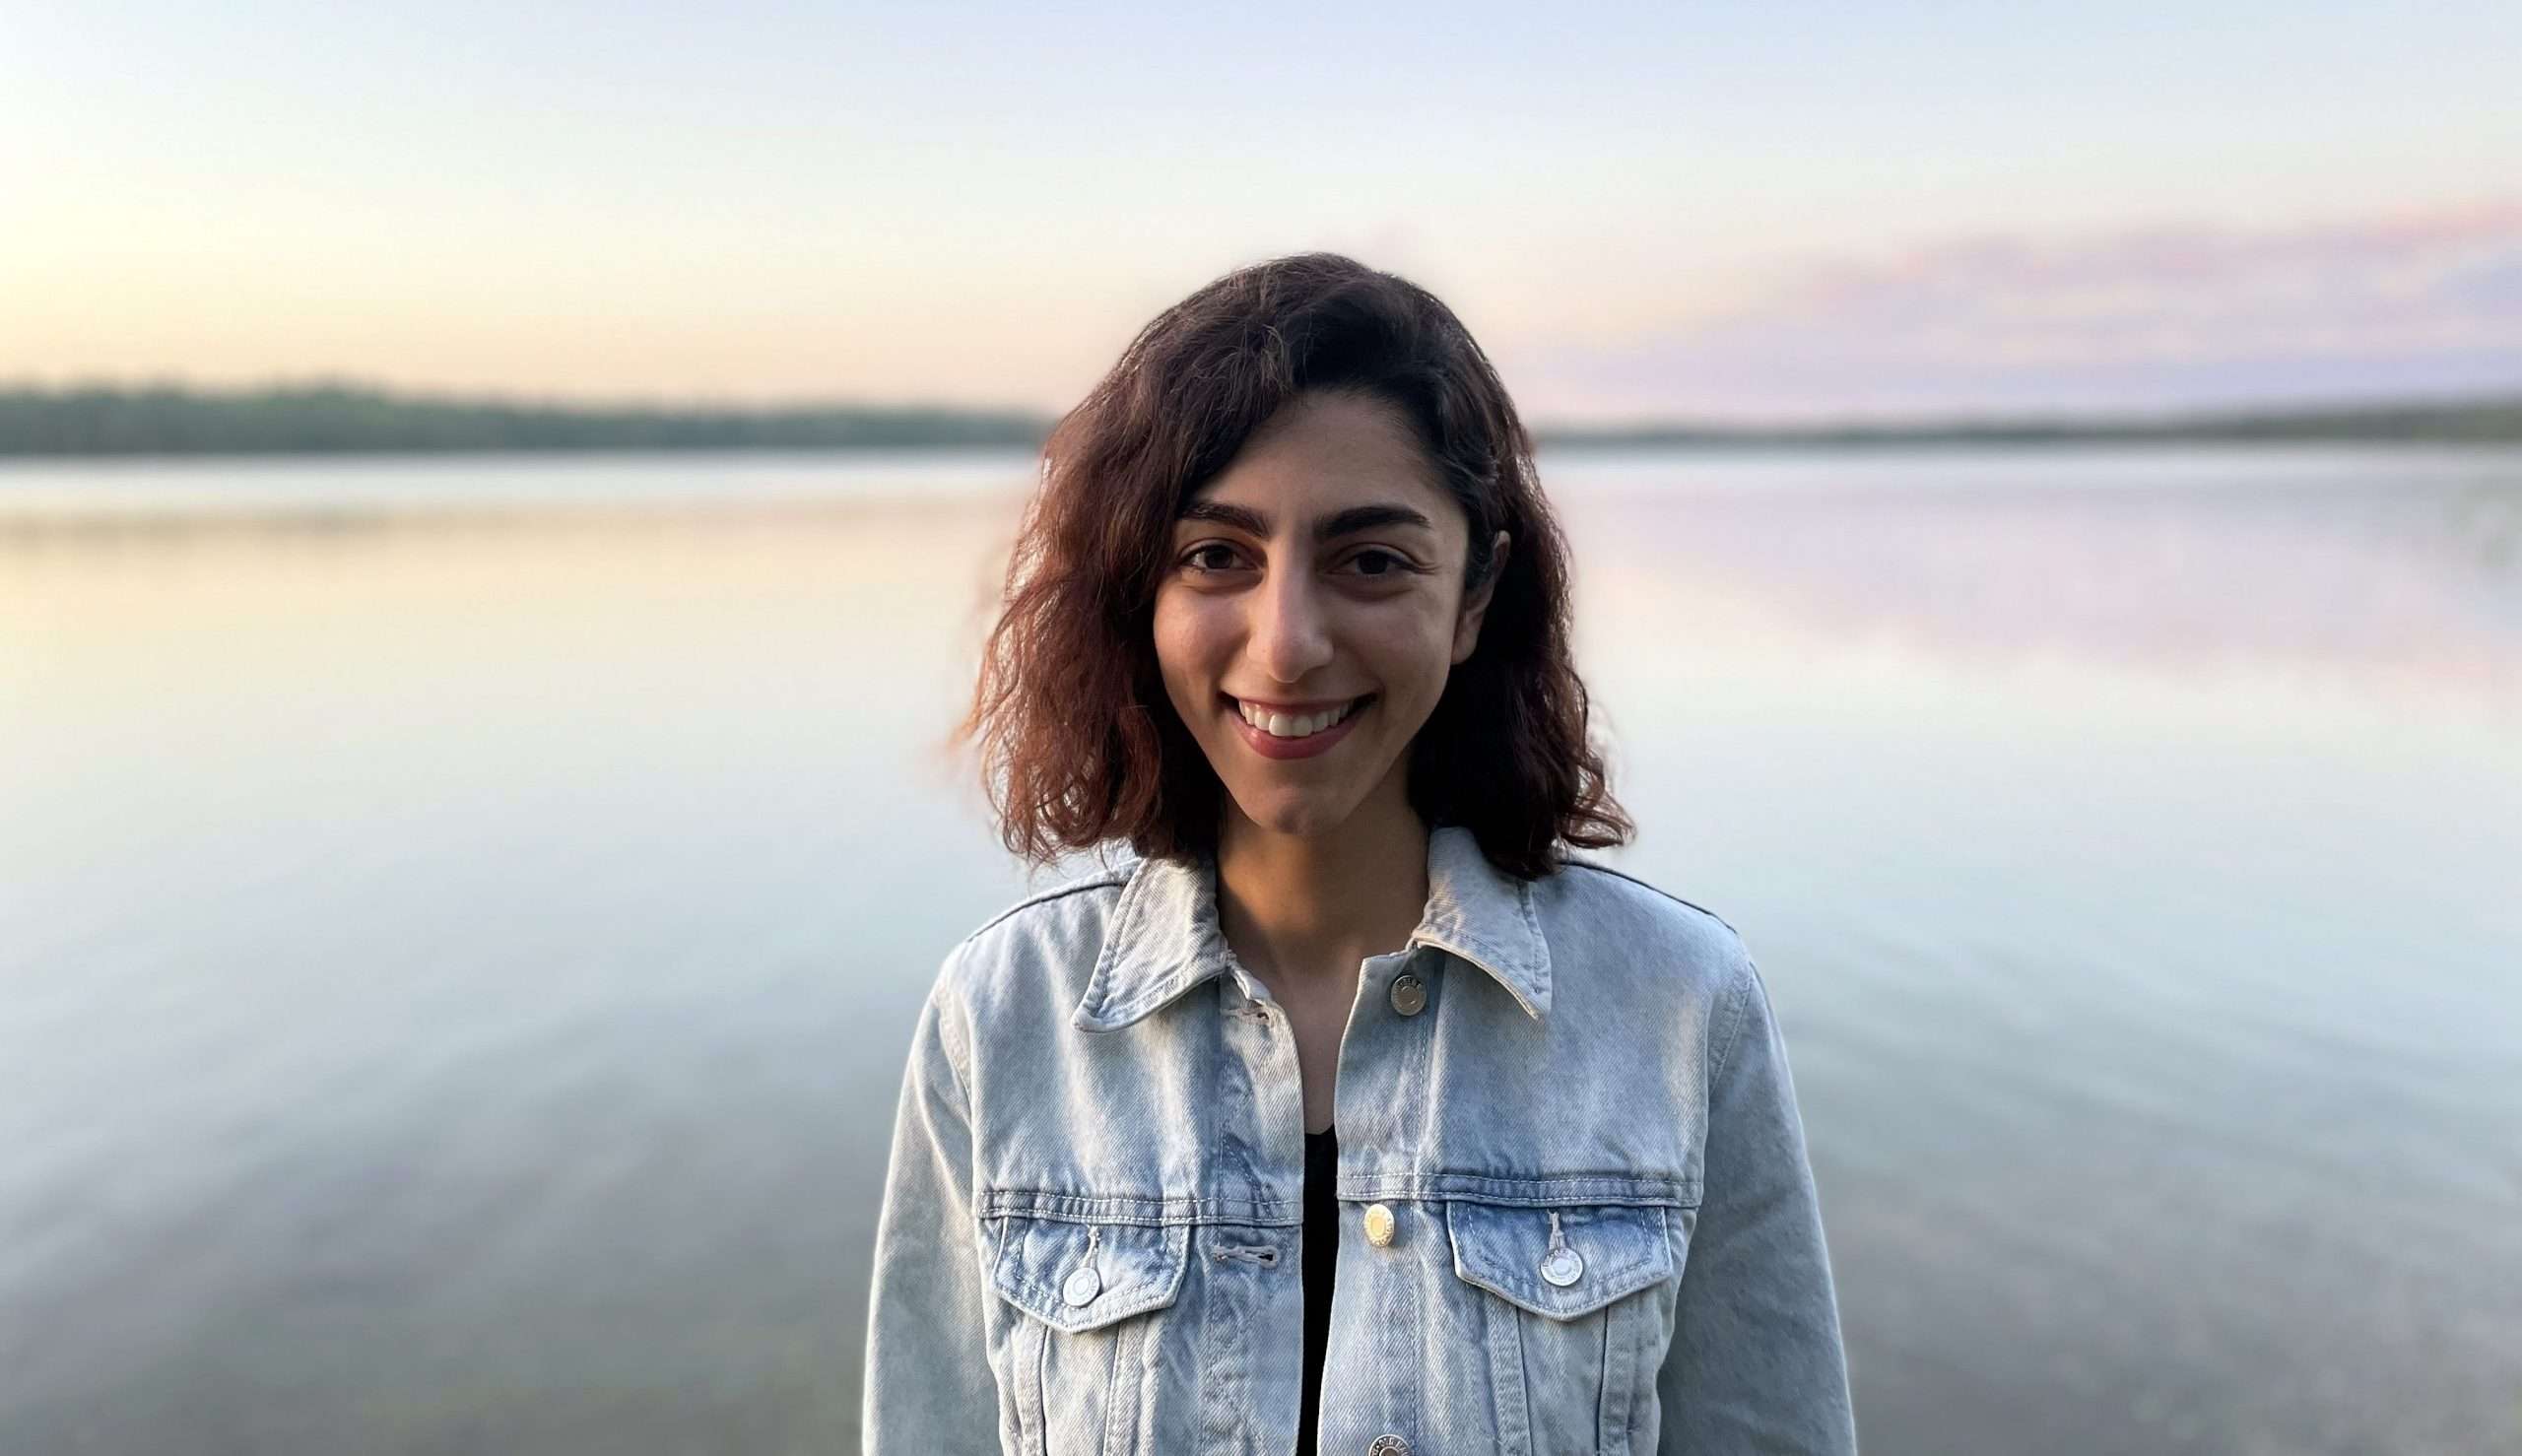 Photo of Maryam standing in front of a lake